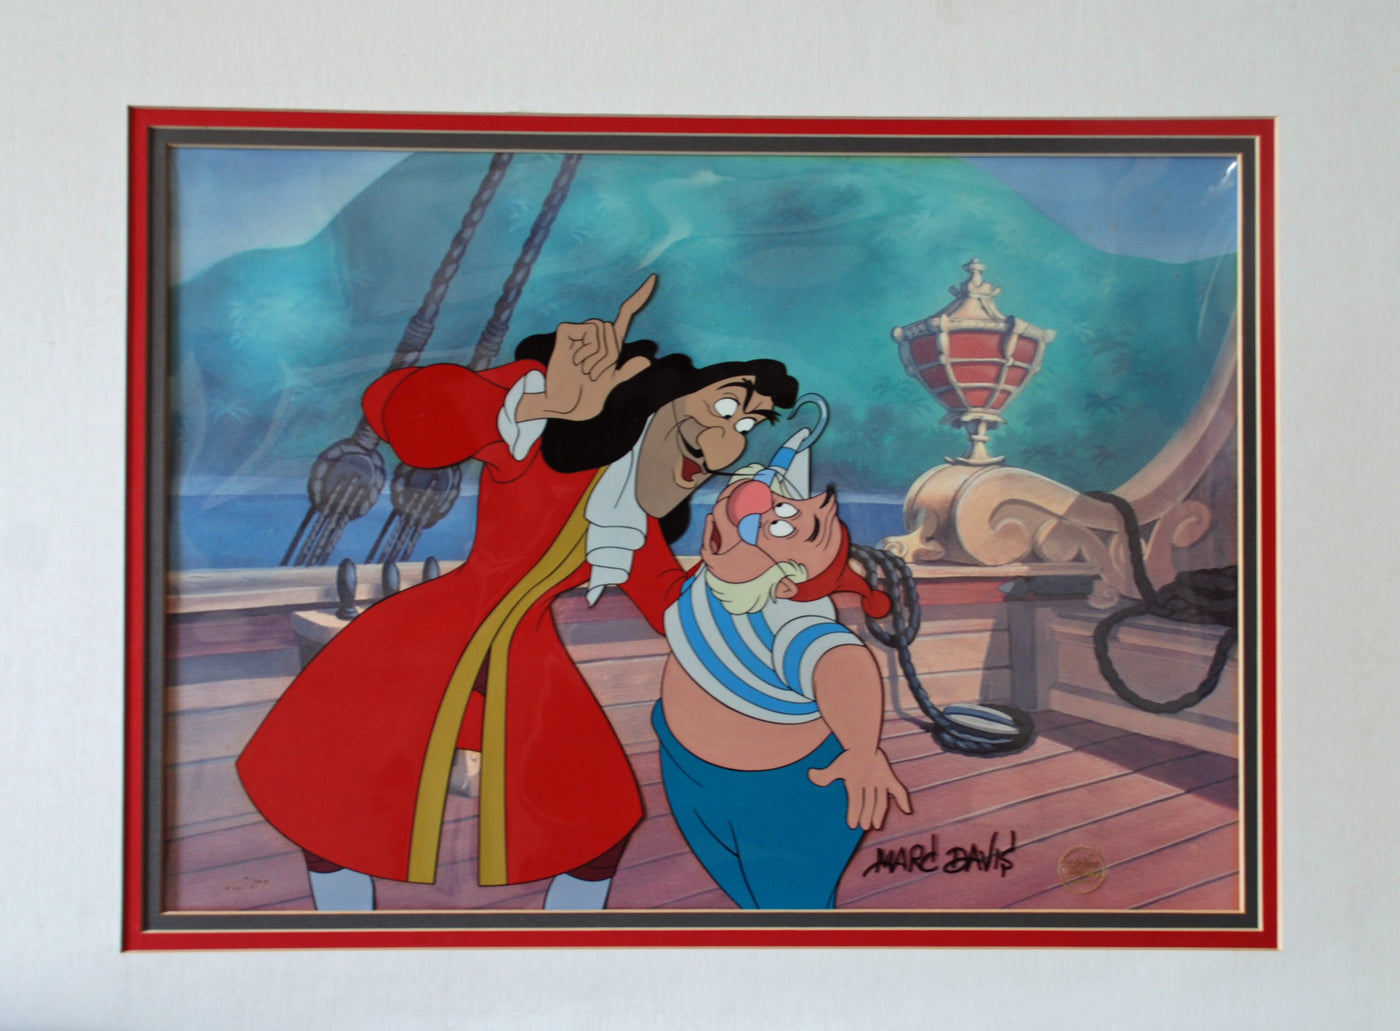 Disney Animation Art Limited Edition Cel Featuring Hook and Smee from "Disney Villains Volume I," Signed by Marc Davis